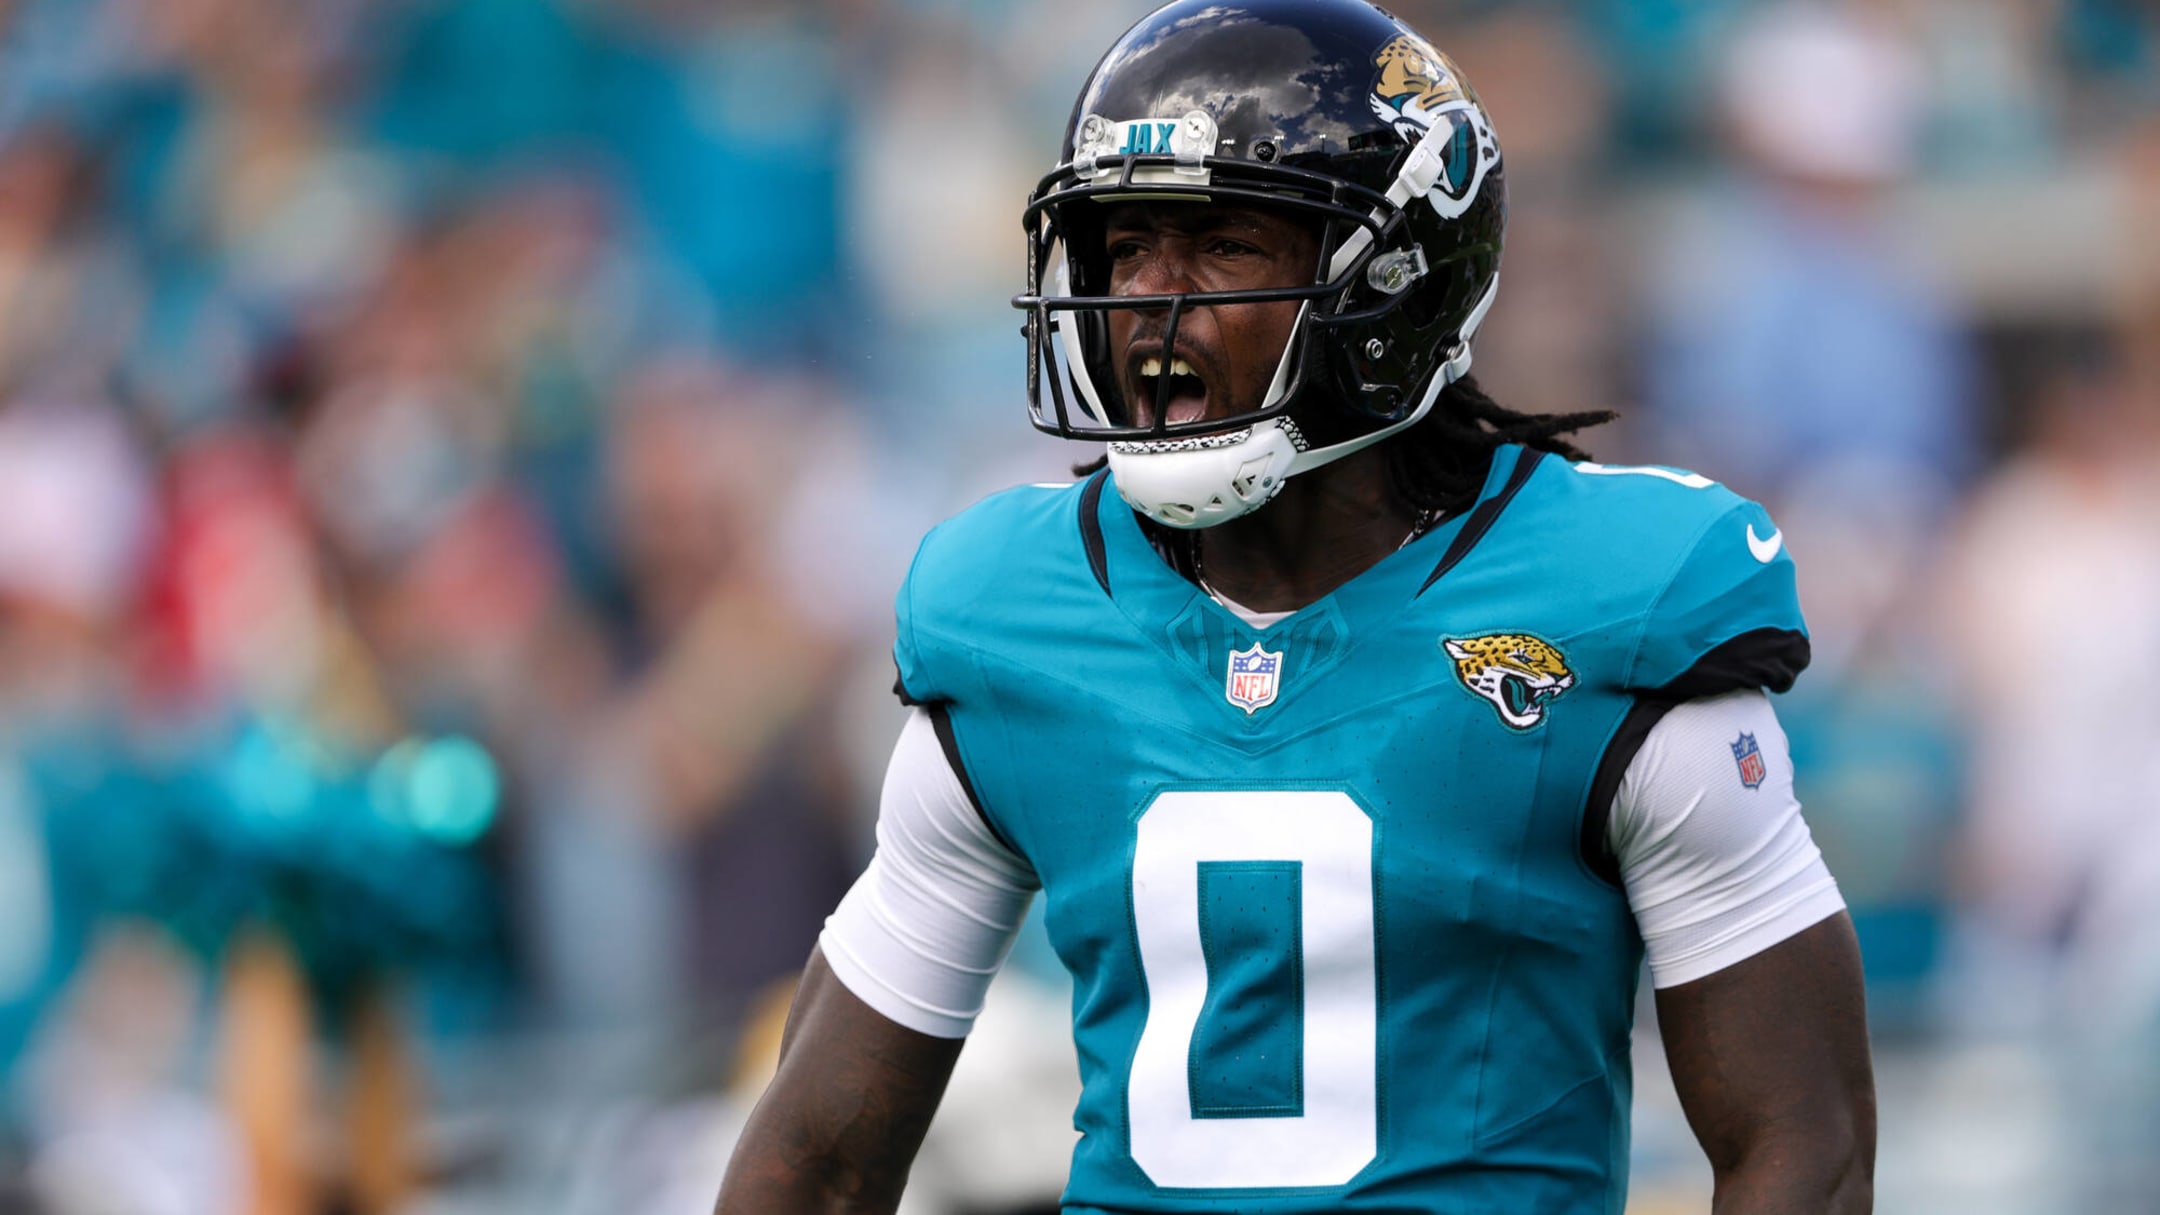 FOX Sports: NFL on X: A reminder that the @Jaguars have Calvin